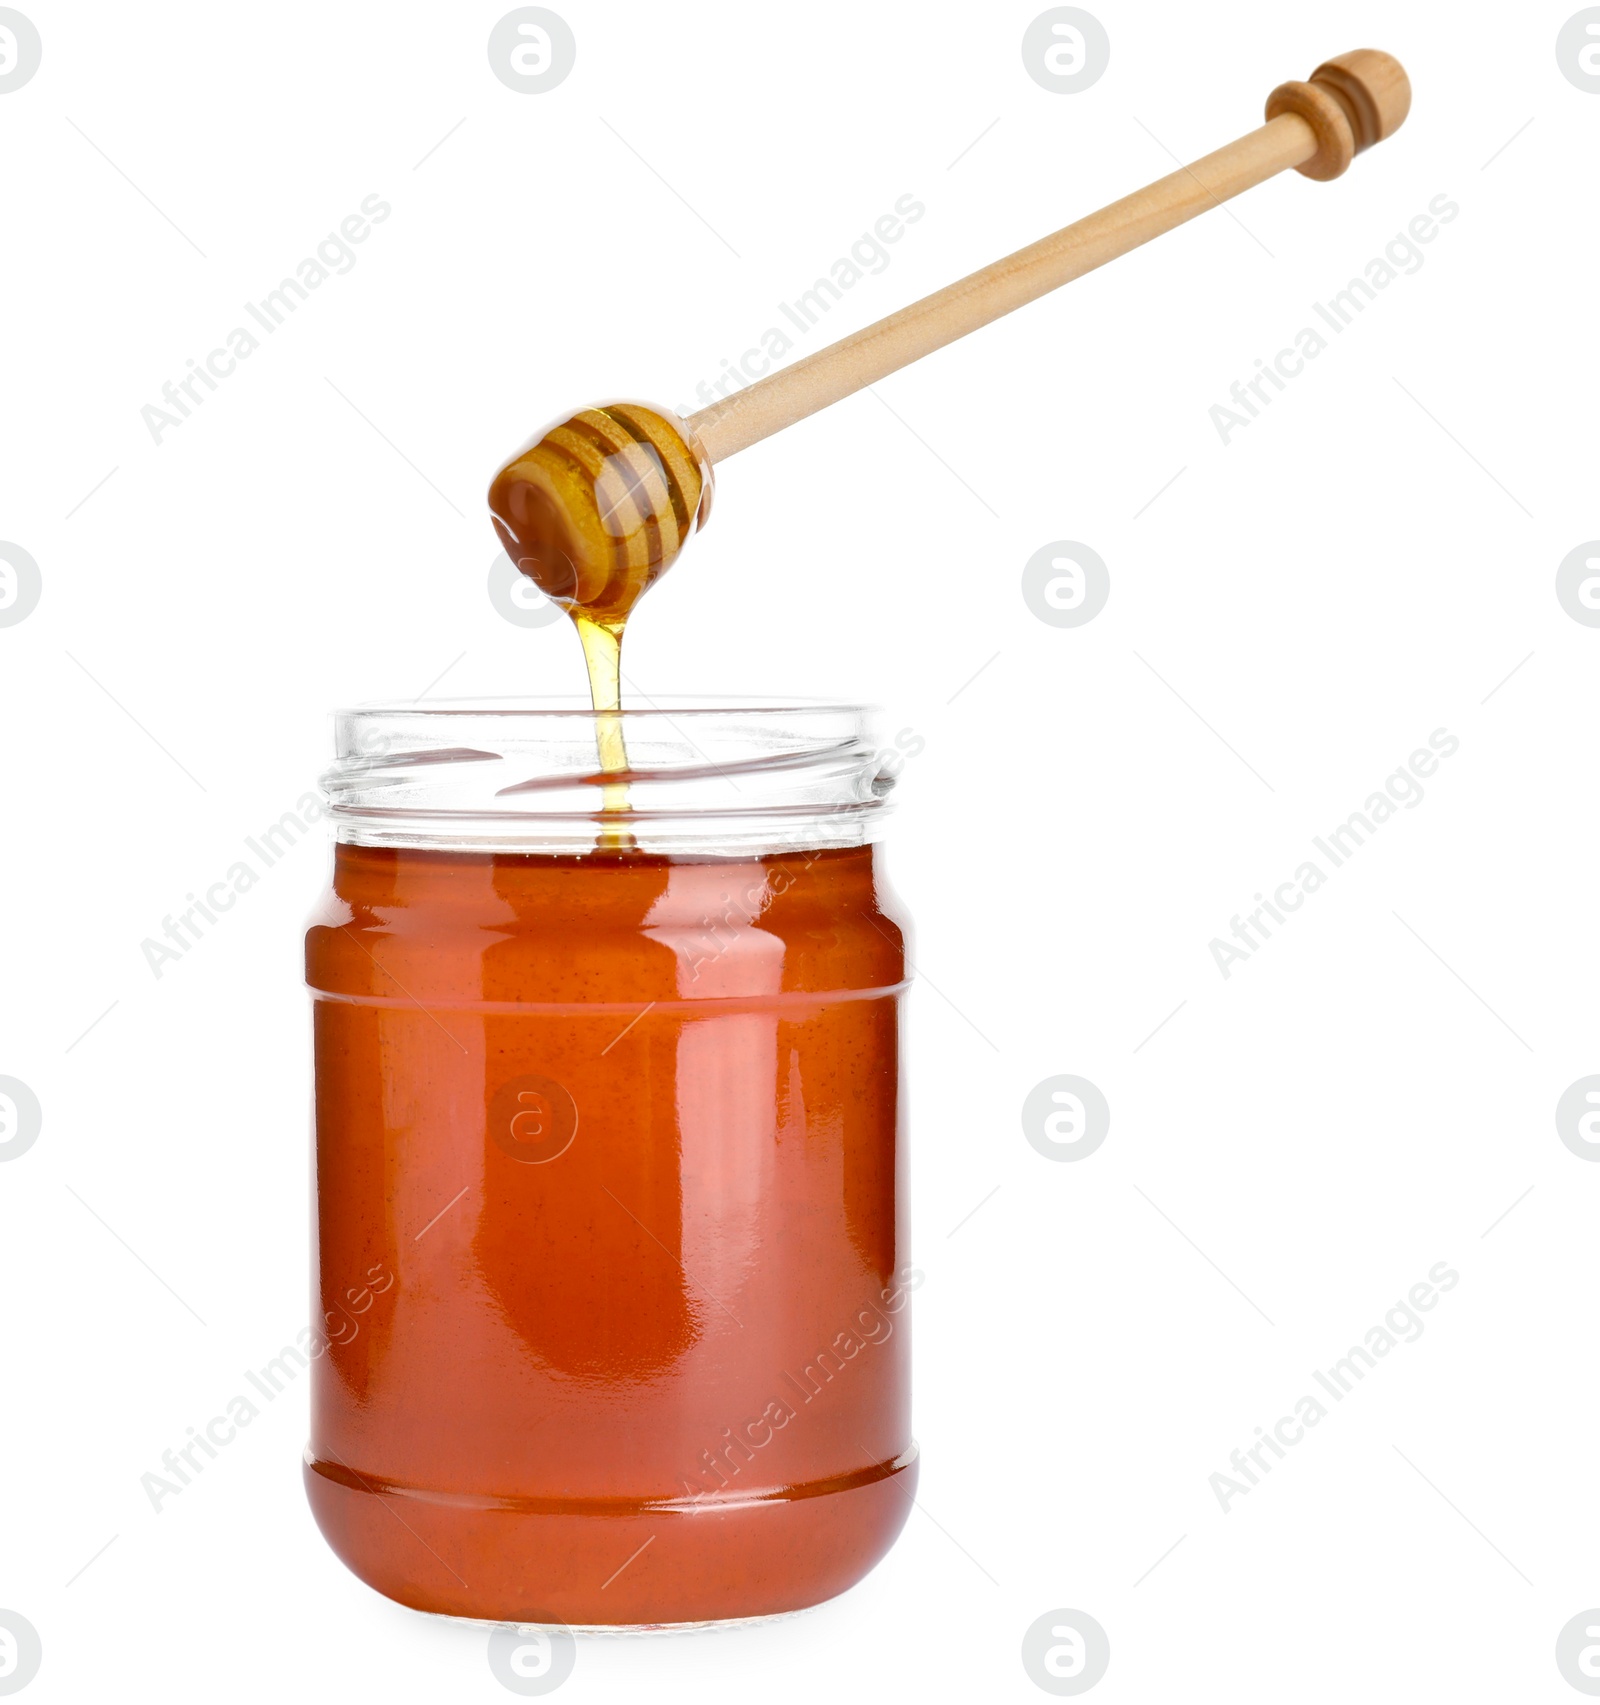 Photo of Glass jar of wildflower honey and wooden dipper isolated on white